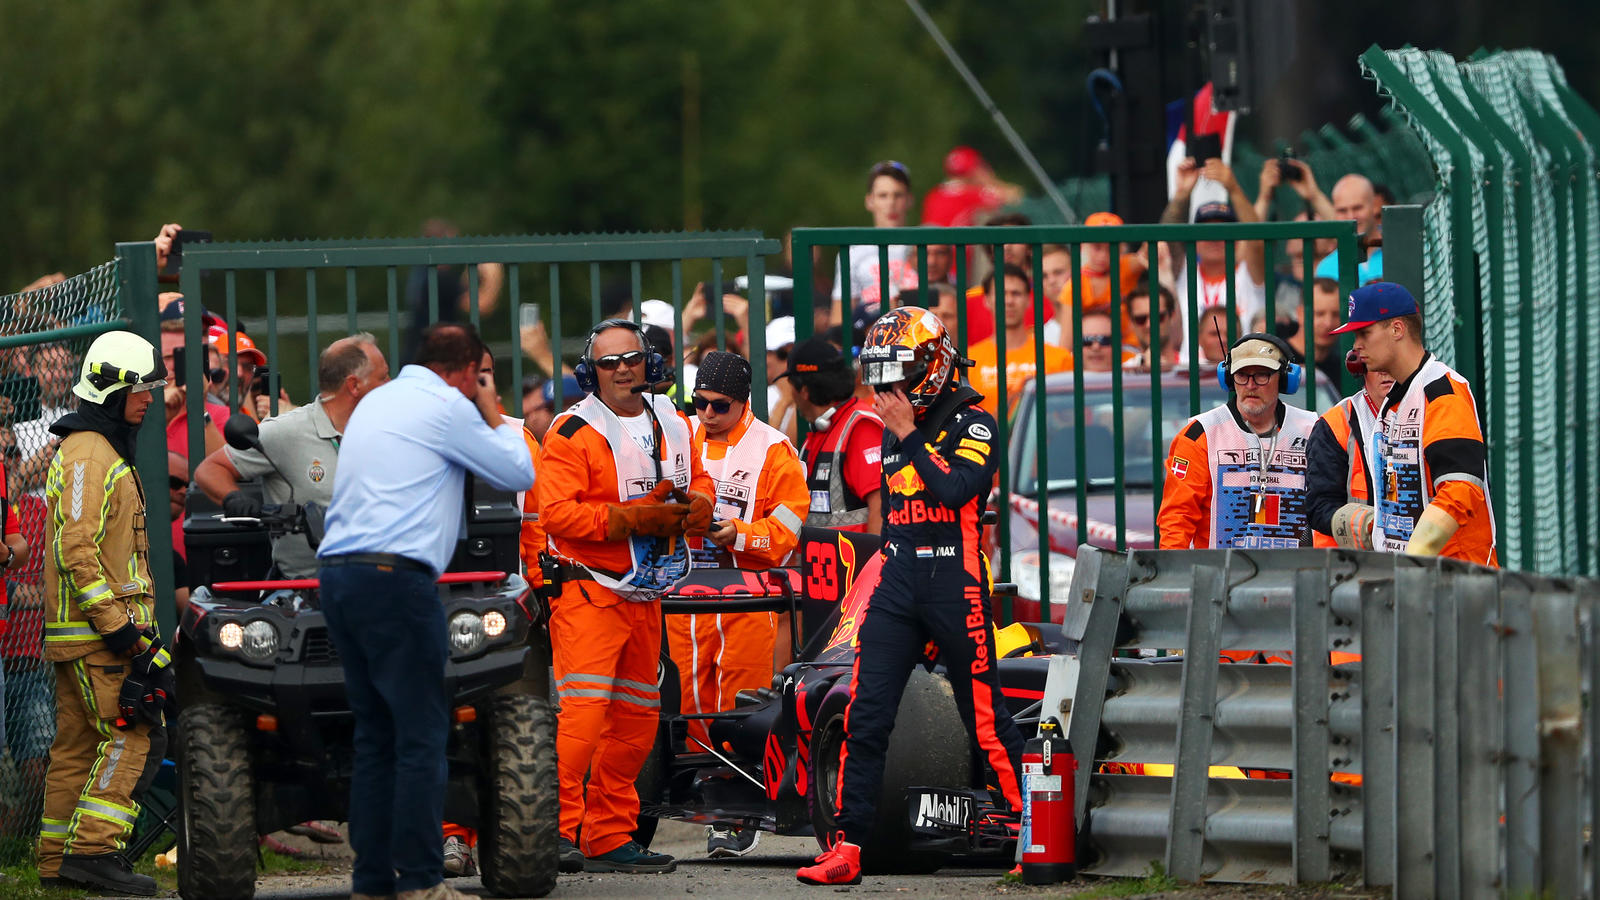 SPA, BELGIUM - AUGUST 27: Max Verstappen of Netherlands and Red Bull Racing walks from his car after retiring during the Formula One Grand Prix of Belgium at Circuit de Spa-Francorchamps on August 27, 2017 in Spa, Belgium.  (Photo by Dan Istitene/Get